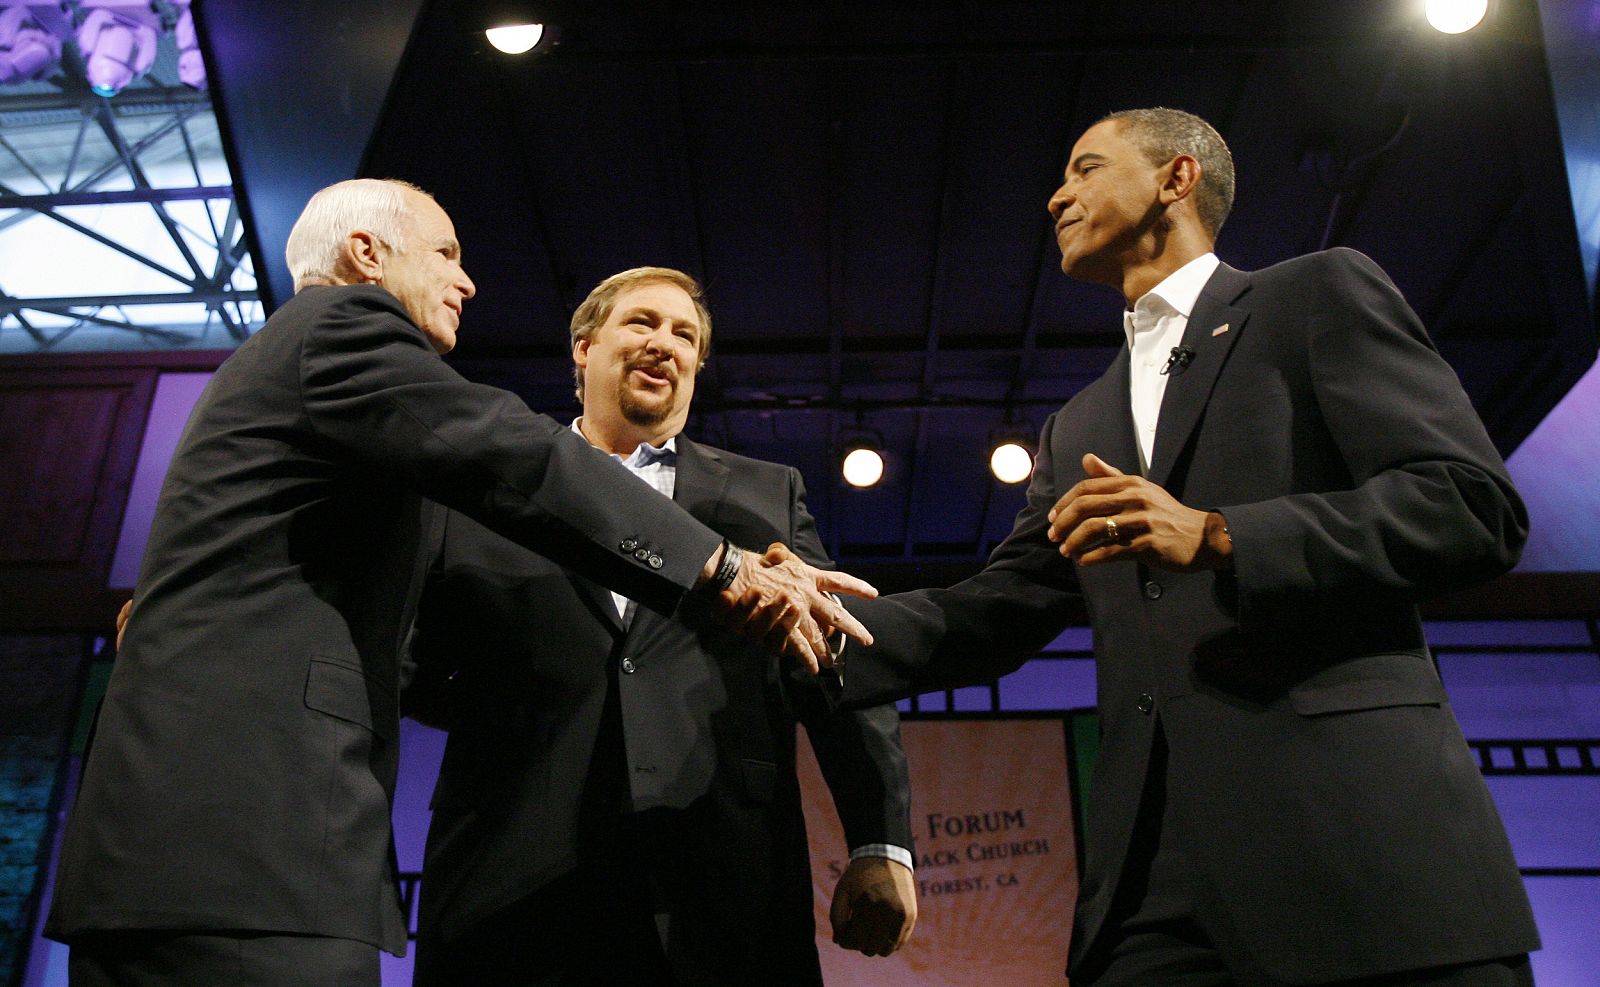 John McCain shakes hands with Barack Obama, as Rick Warren watches, at the Civil Forum on the Presidency at Saddleback Church in Lake Forest